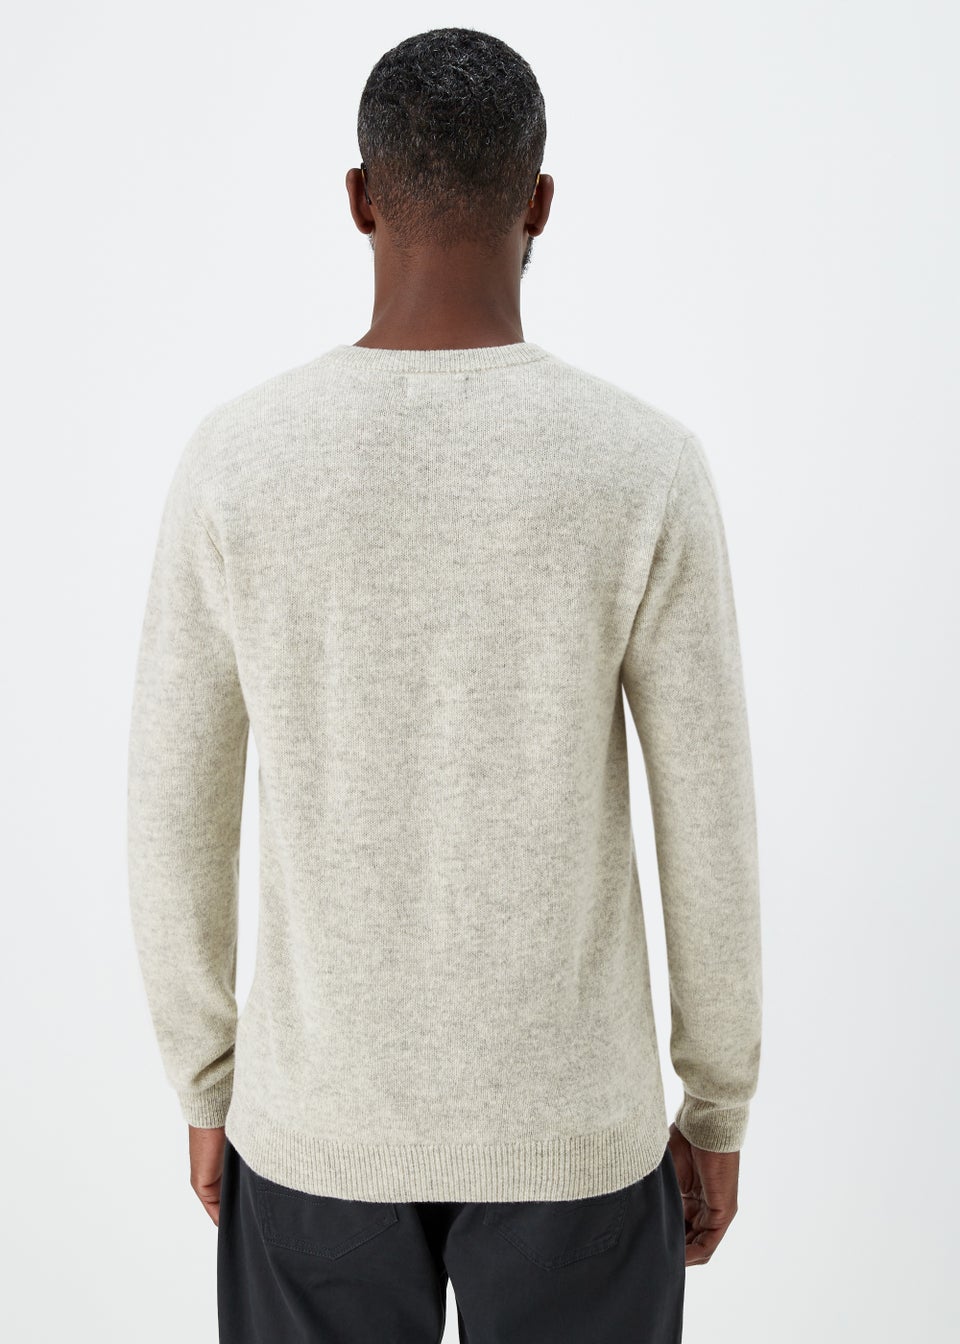 Lincoln Oatmeal 100% Lambswool V Neck Jumper